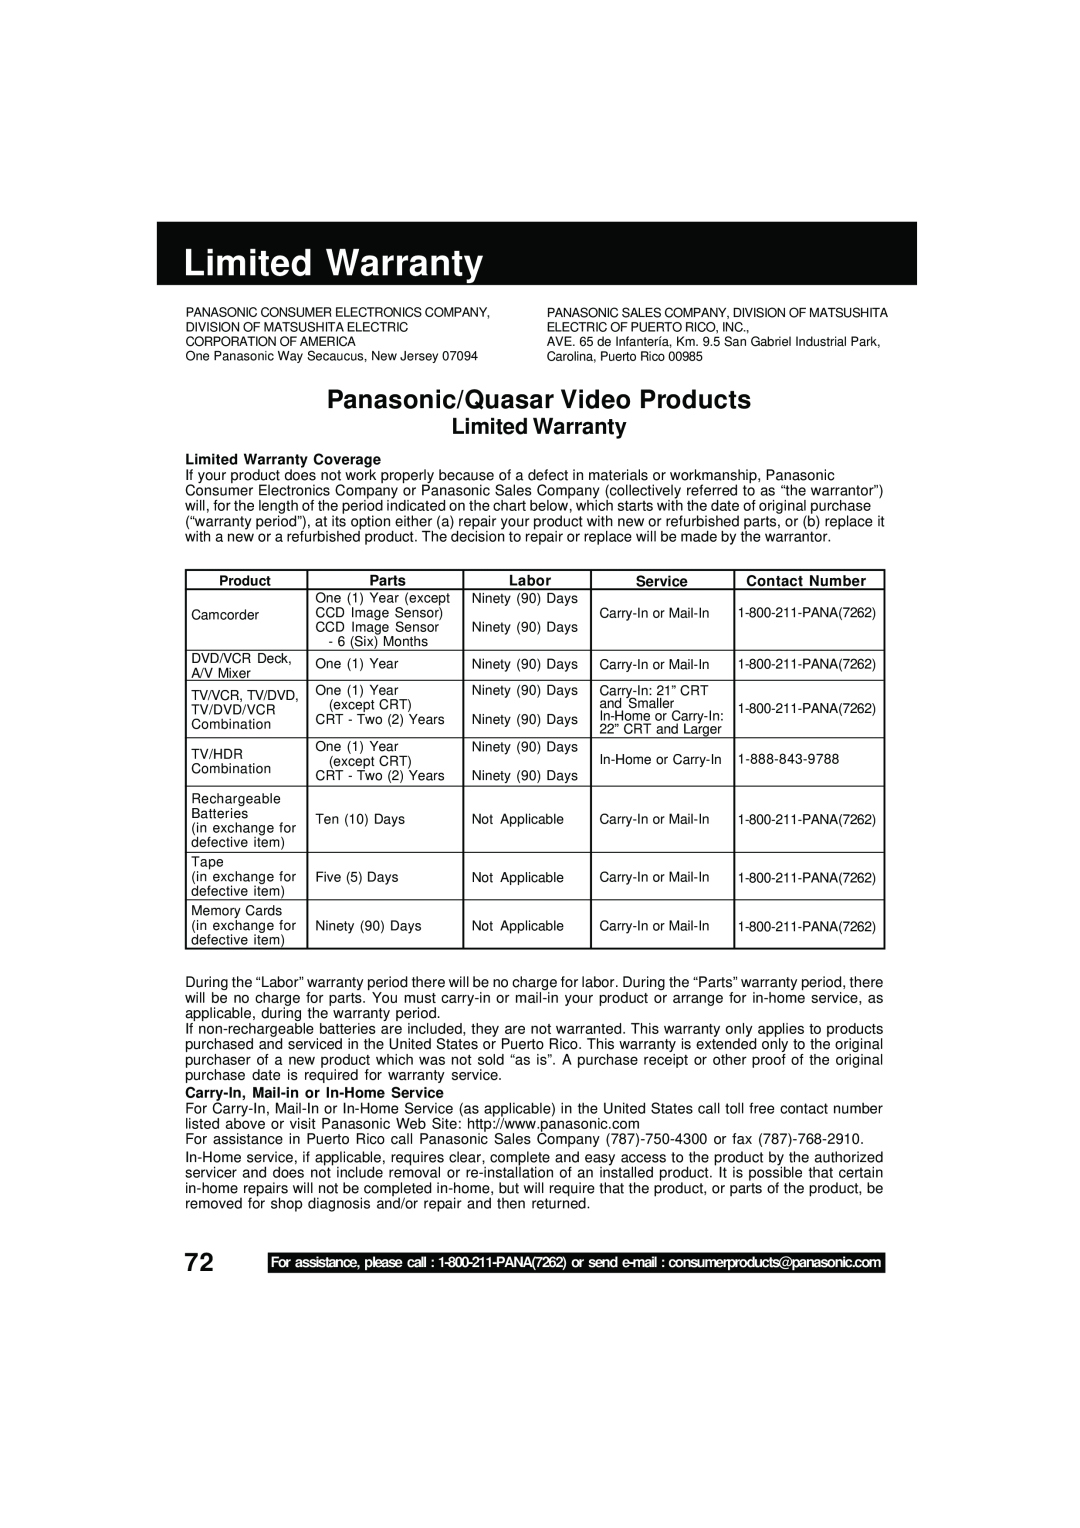 Panasonic PV DM2092 Panasonic/Quasar Video Products, Limited Warranty Coverage, Parts, Labor, Service, Contact Number 